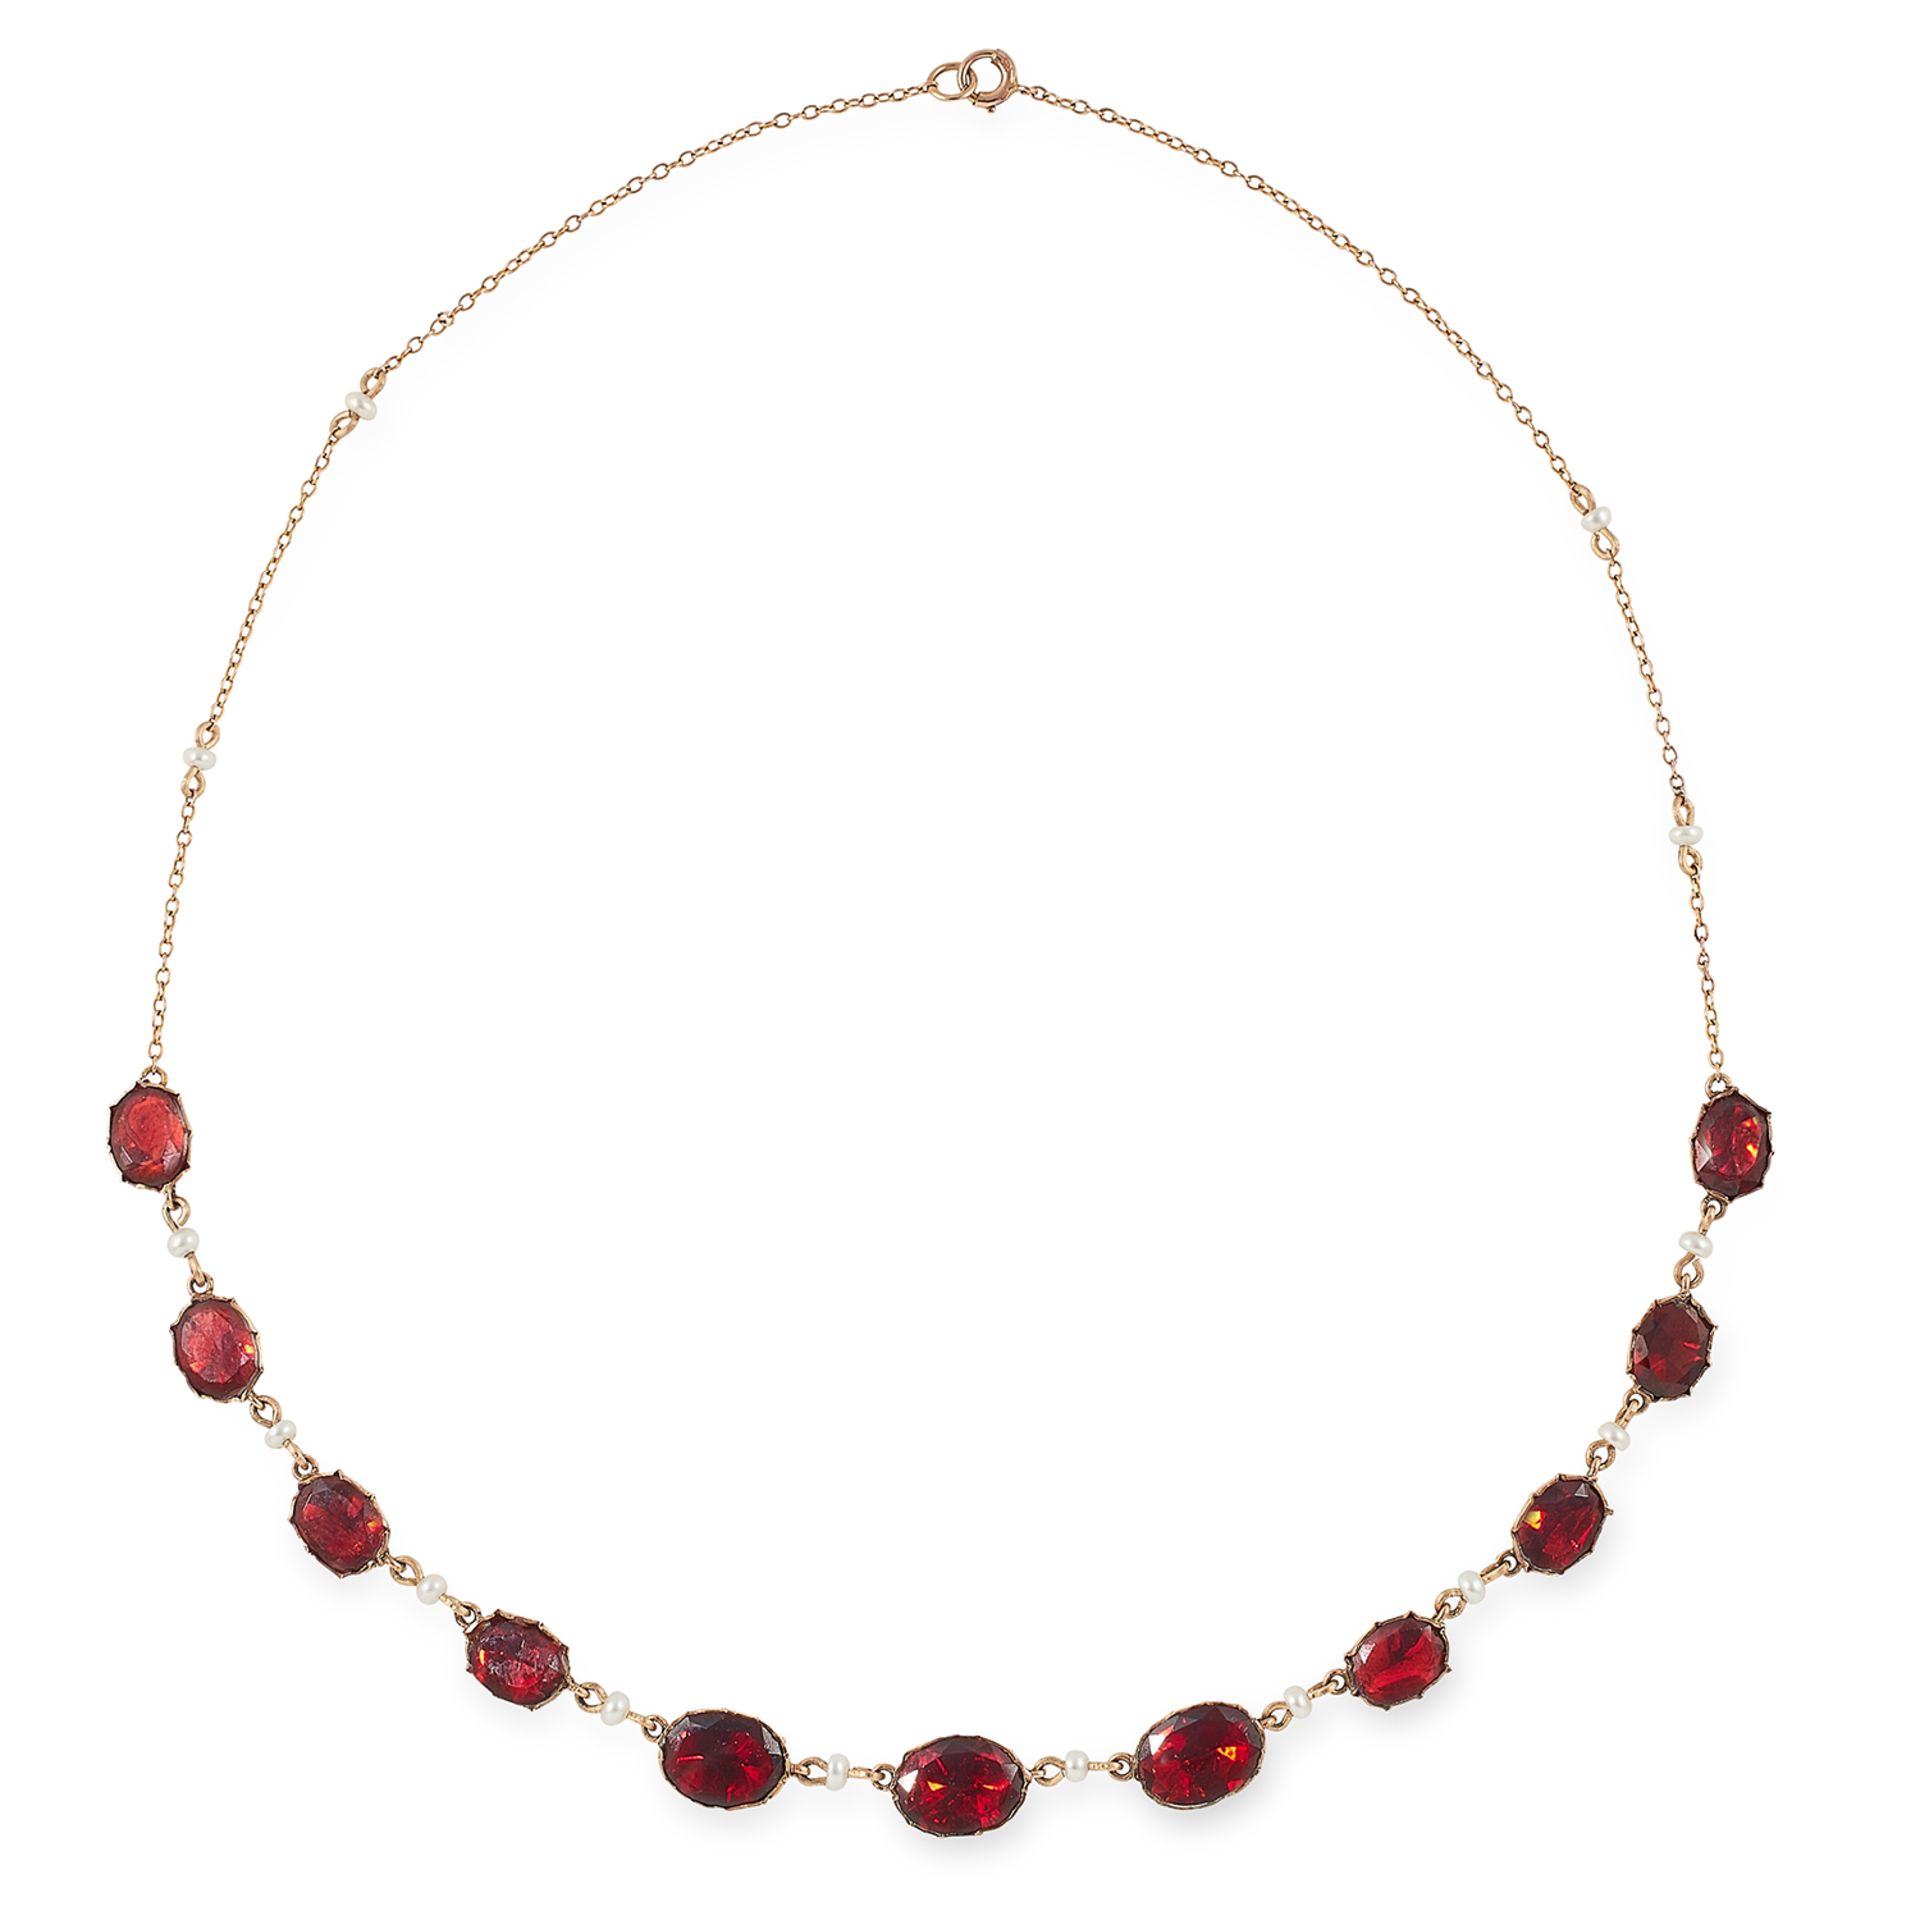 ANTIQUE GARNET AND SEED PEARL NECKLACE set with oval cut garnets and seed pearls, 43cm, 7g.